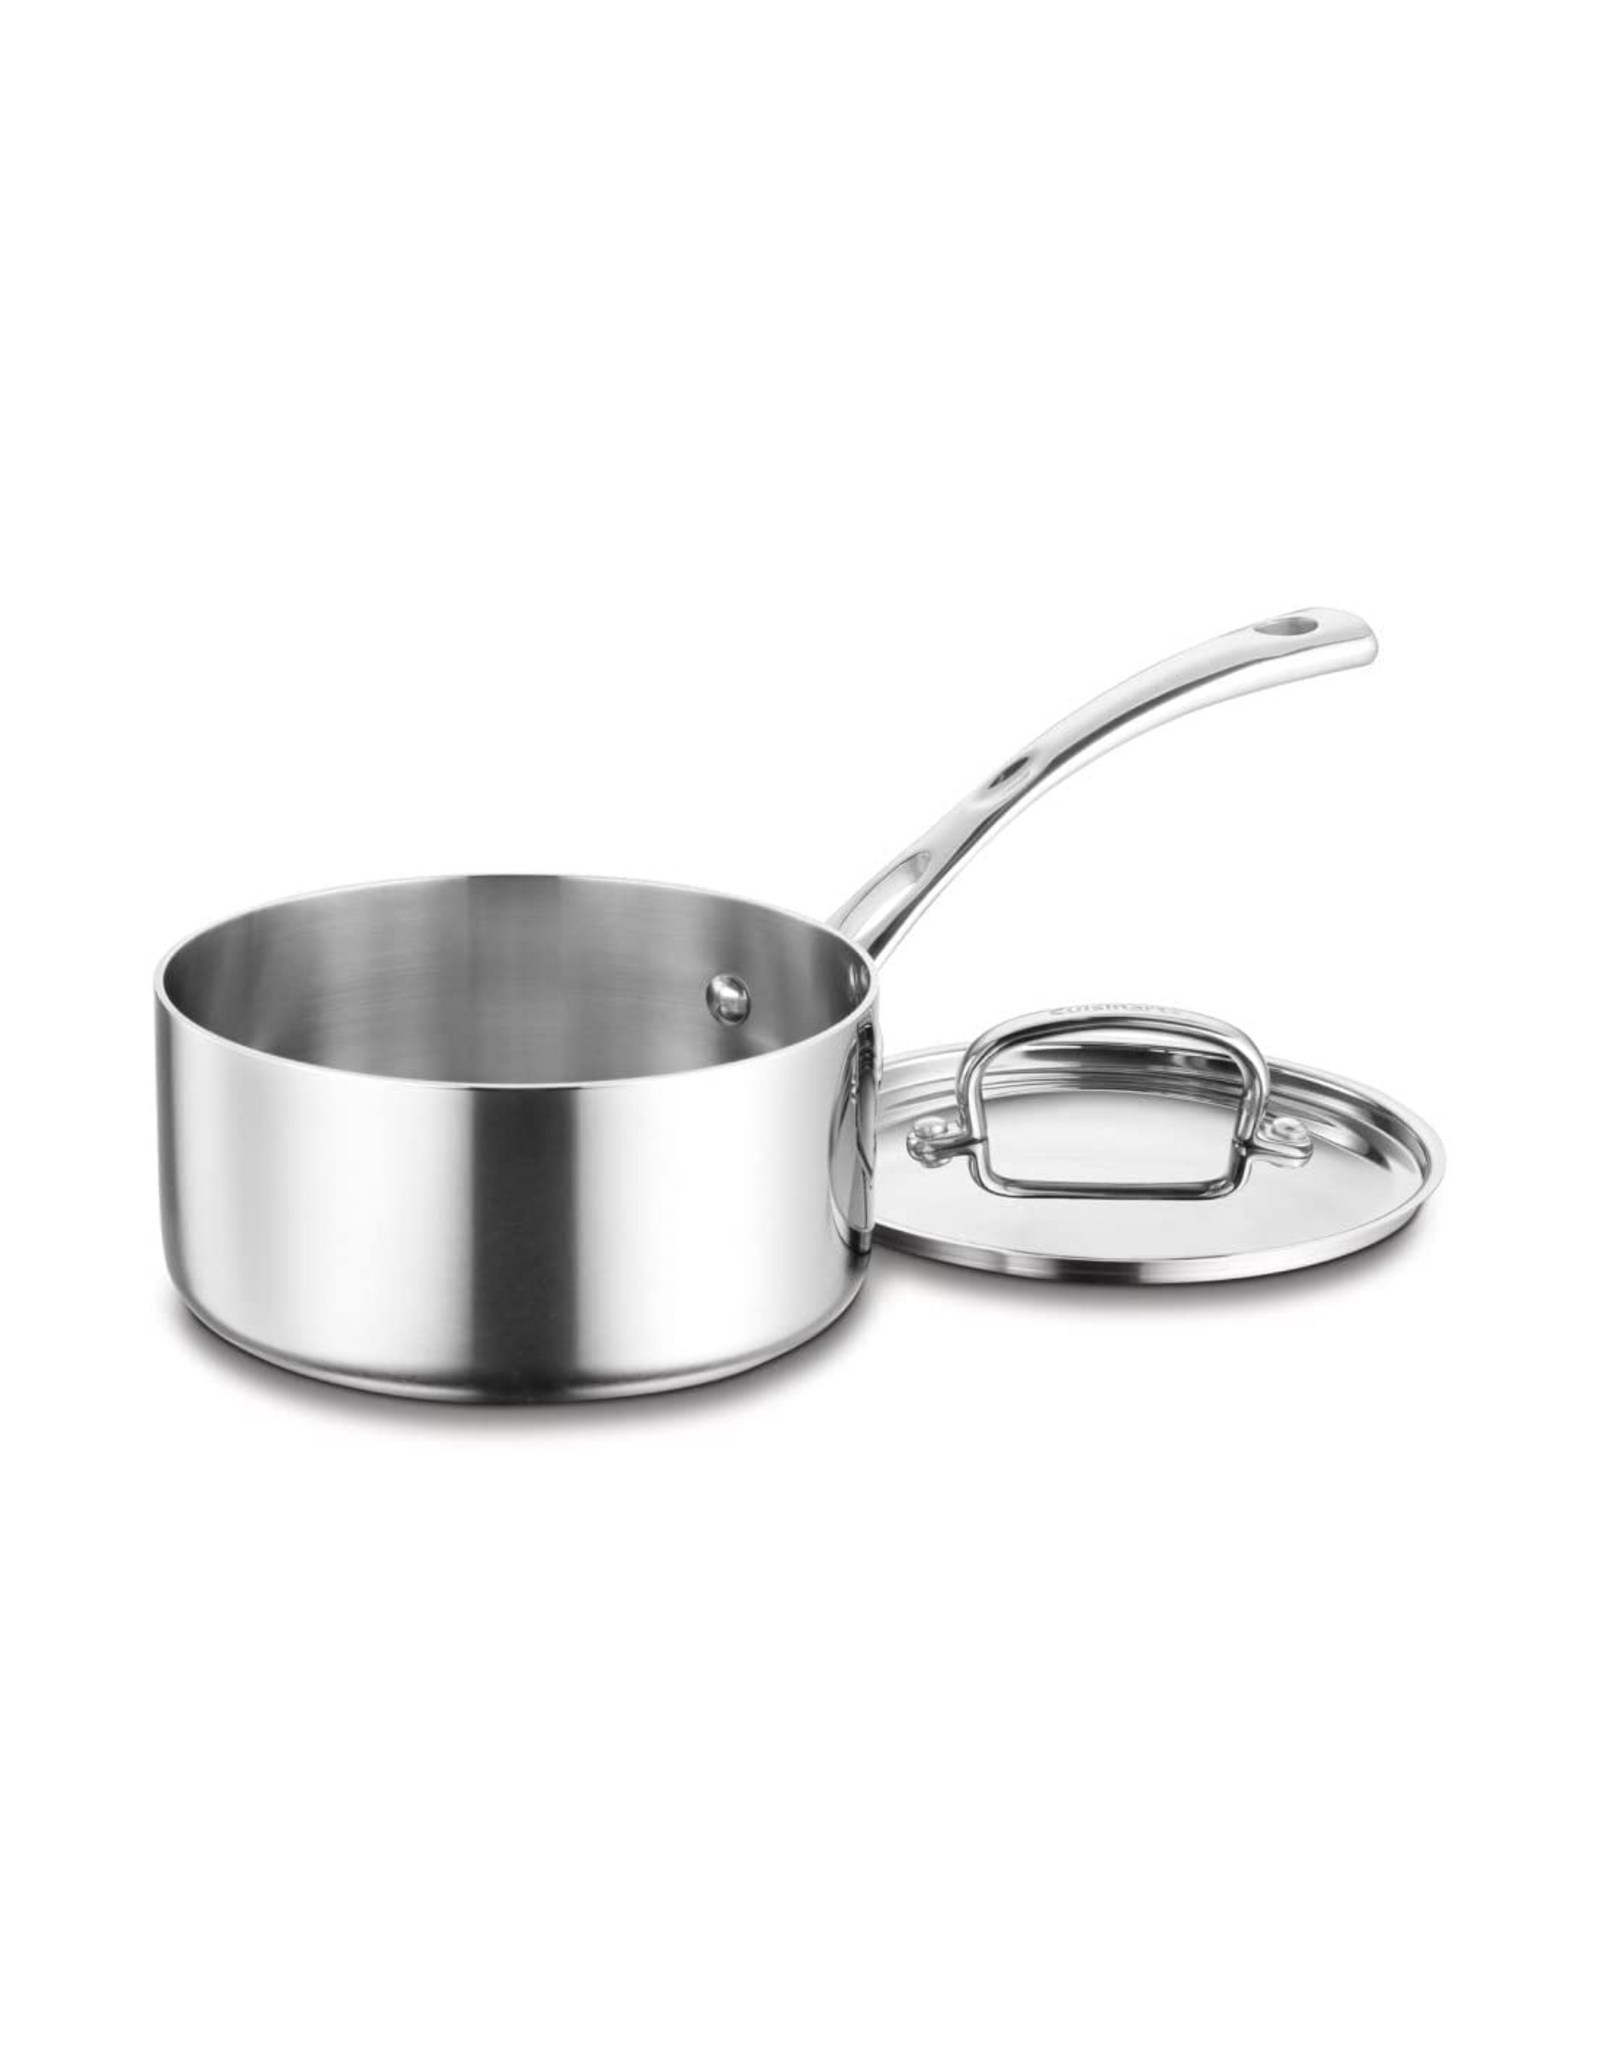 Cuisinart French Classic Tri-Ply Stainless Saucepan with Cover, 2 Qt, Silver